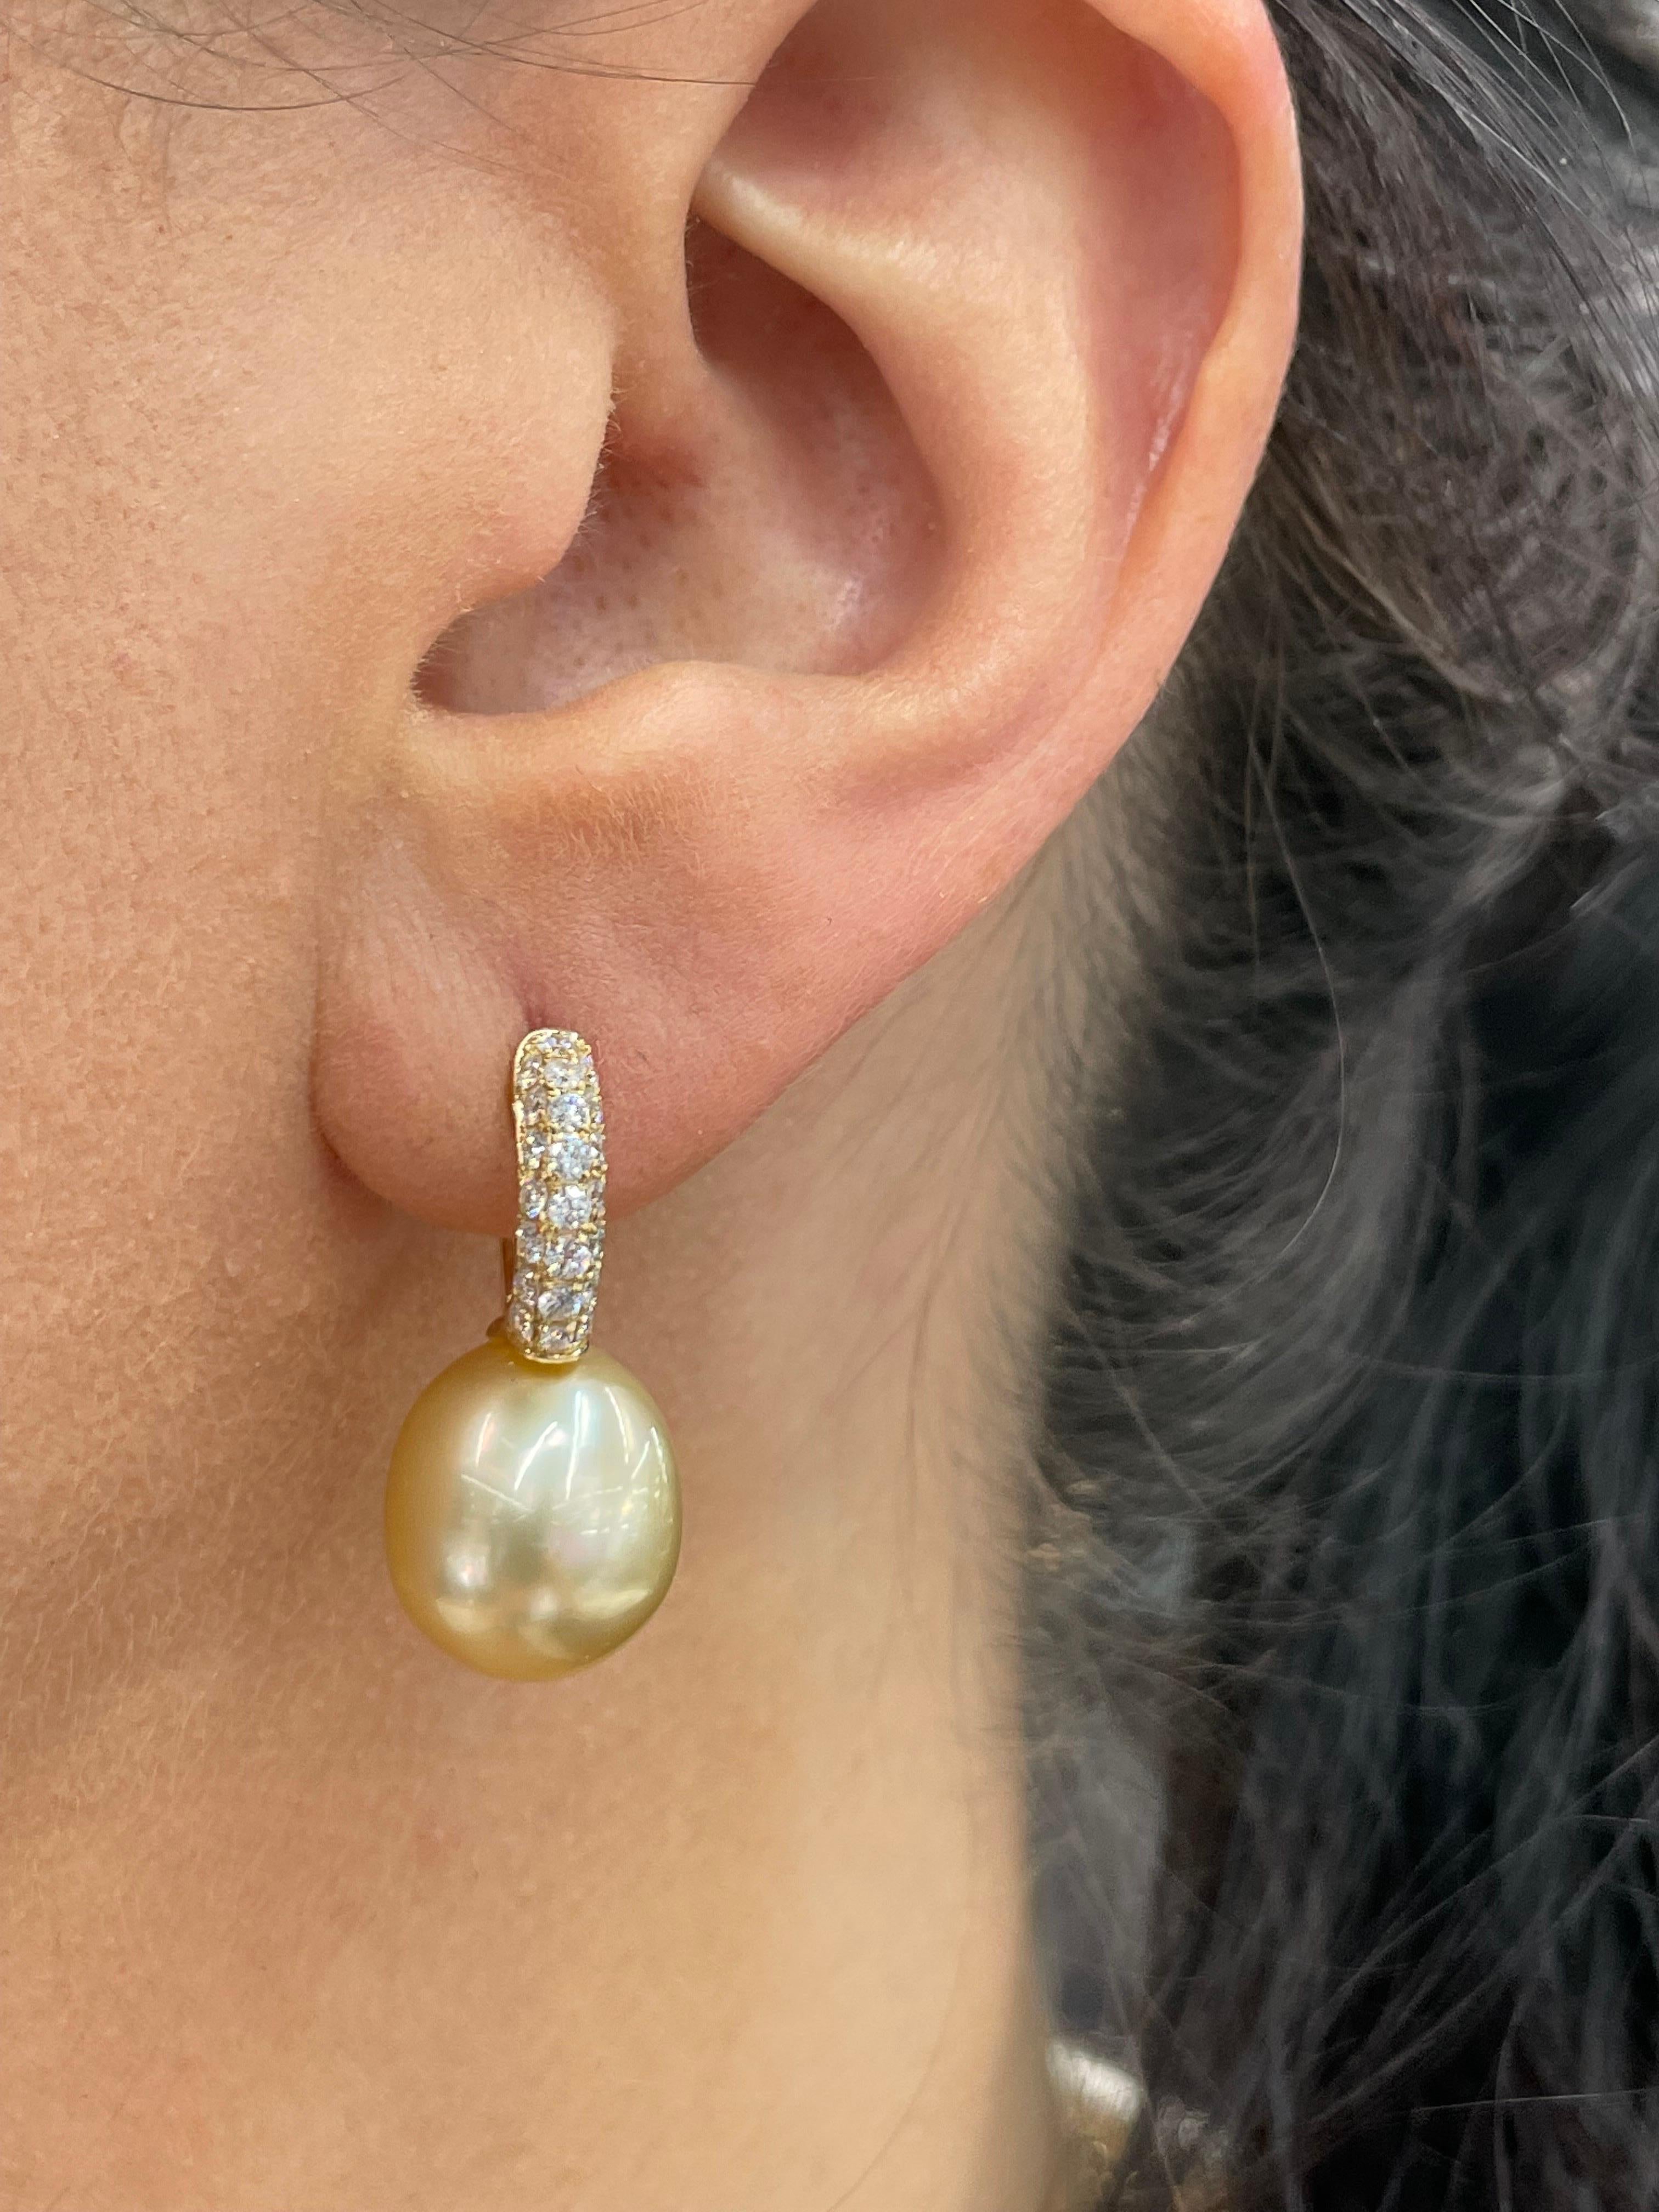 18 Karat Yellow drop earrings featuring 44 round brilliants weighing 0.78 Carats and two Golden South Sea Pearls measuring 12-13 MM.
Color G-H
Clarity SI

Earrings available in different gold colors and pearls. 
DM for more information & pictures. 